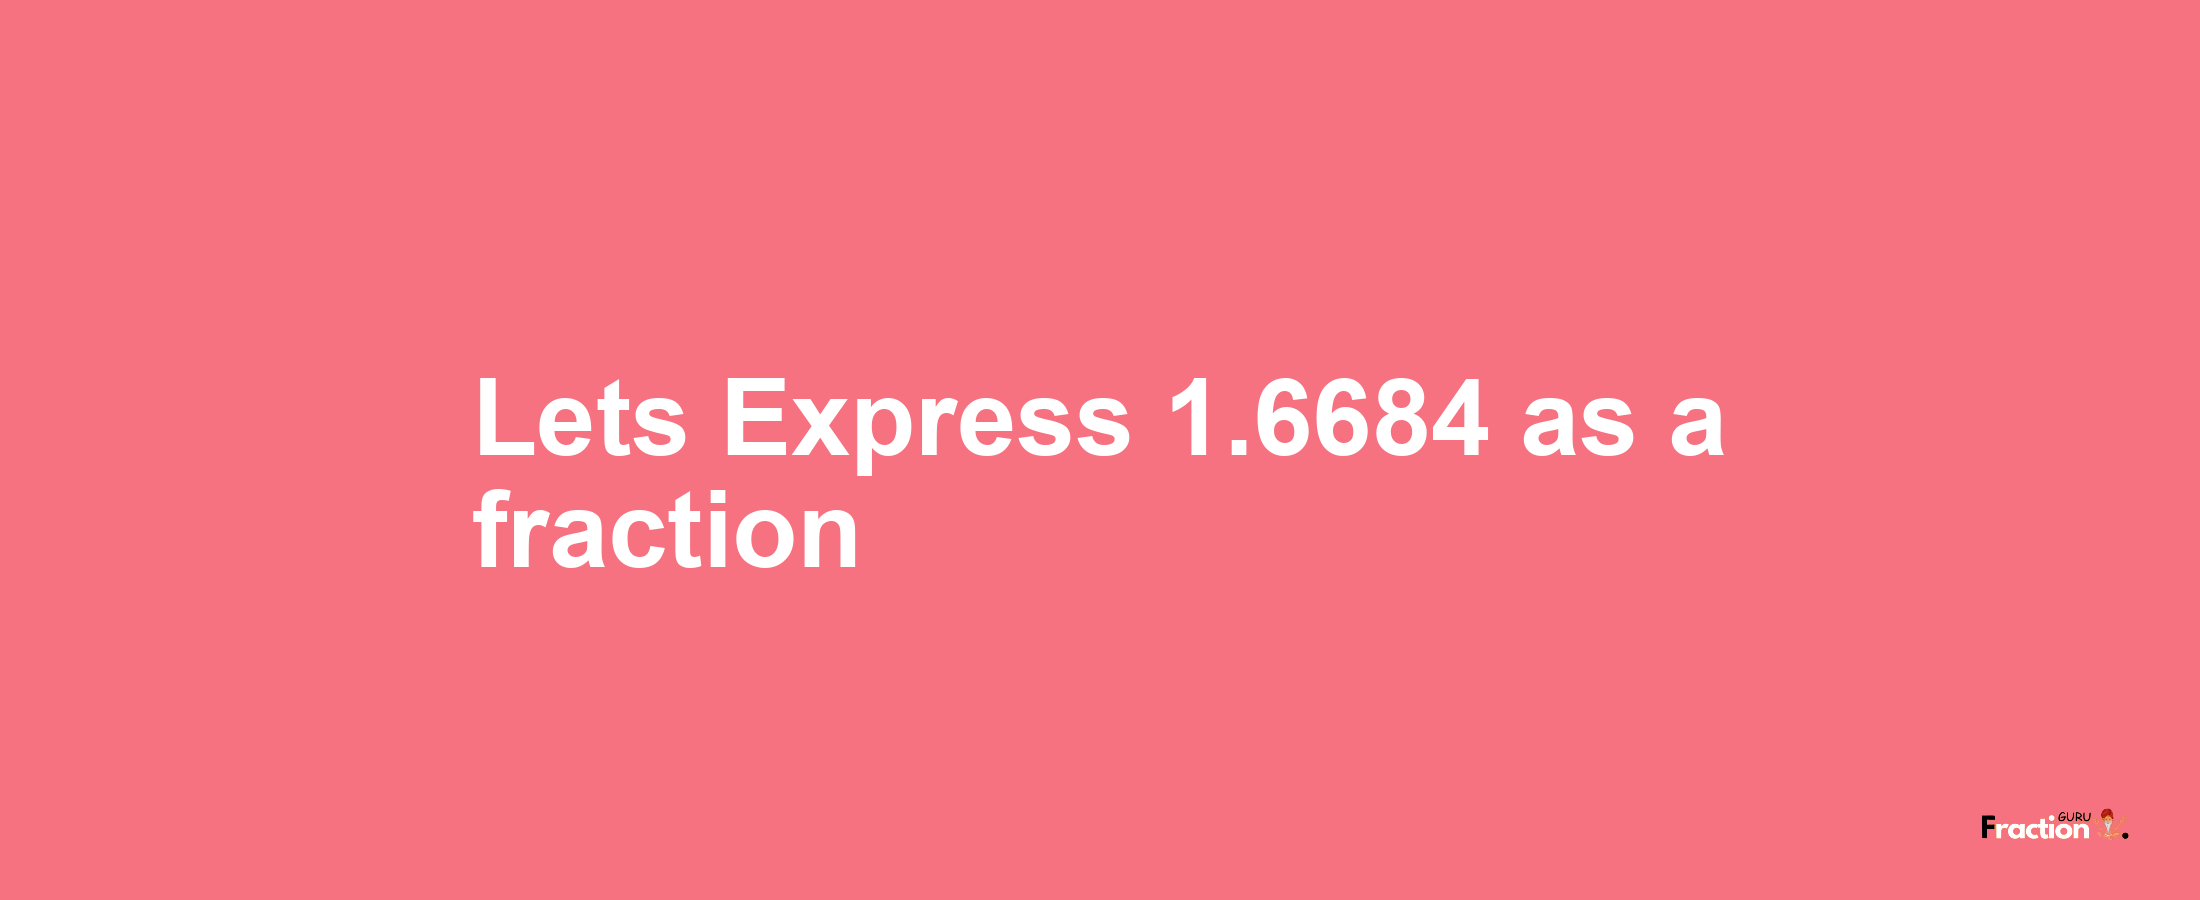 Lets Express 1.6684 as afraction